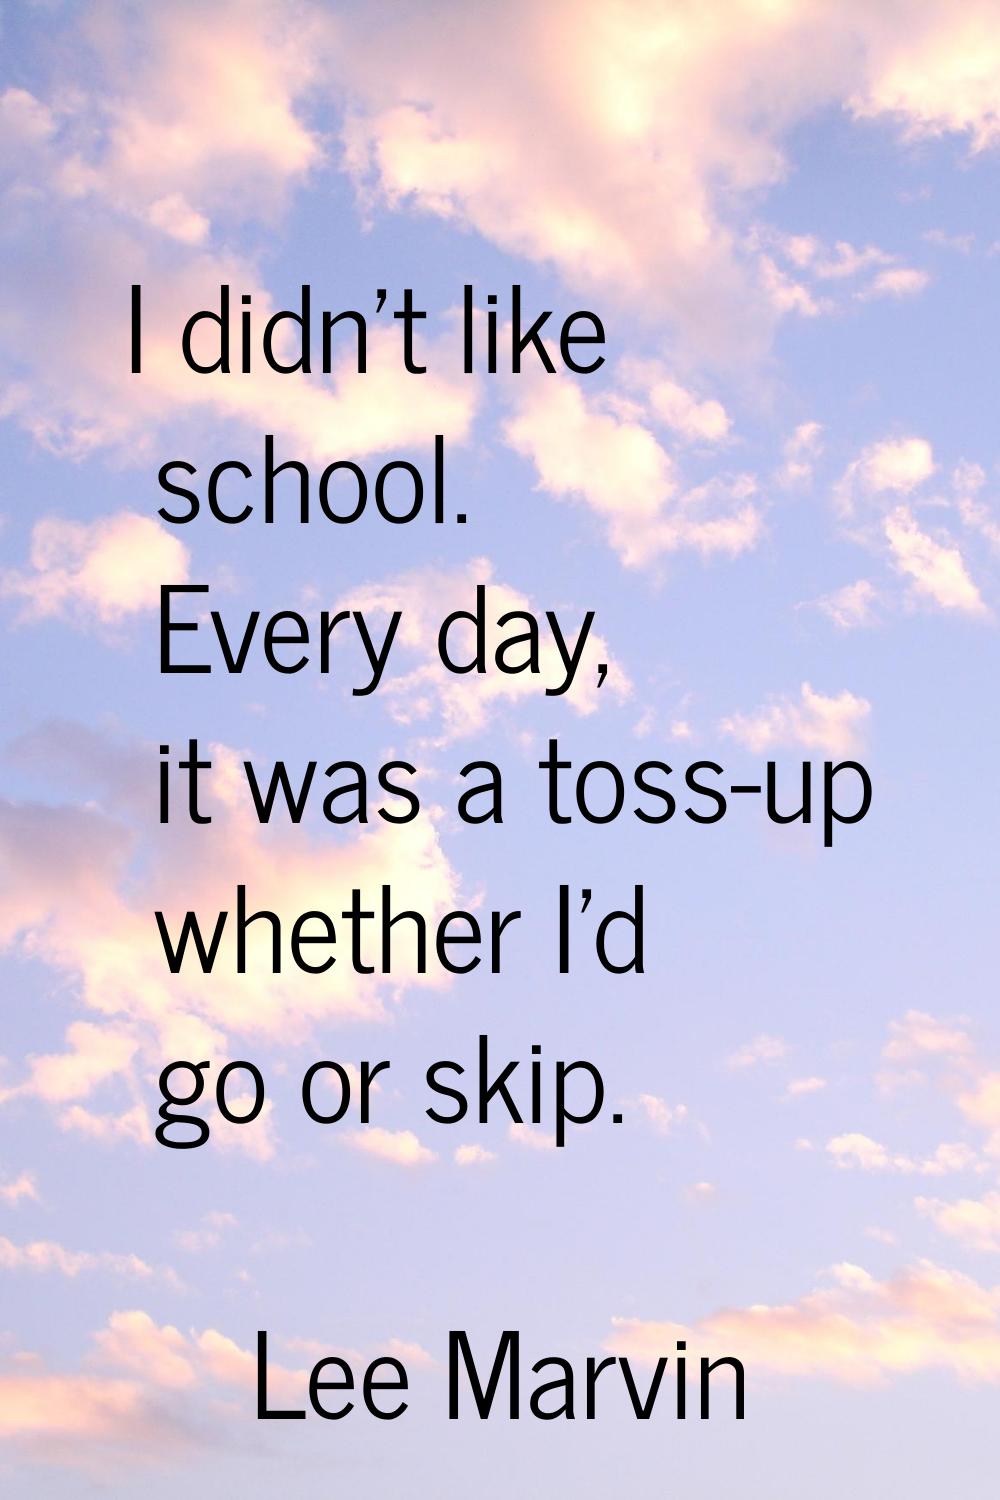 I didn't like school. Every day, it was a toss-up whether I'd go or skip.